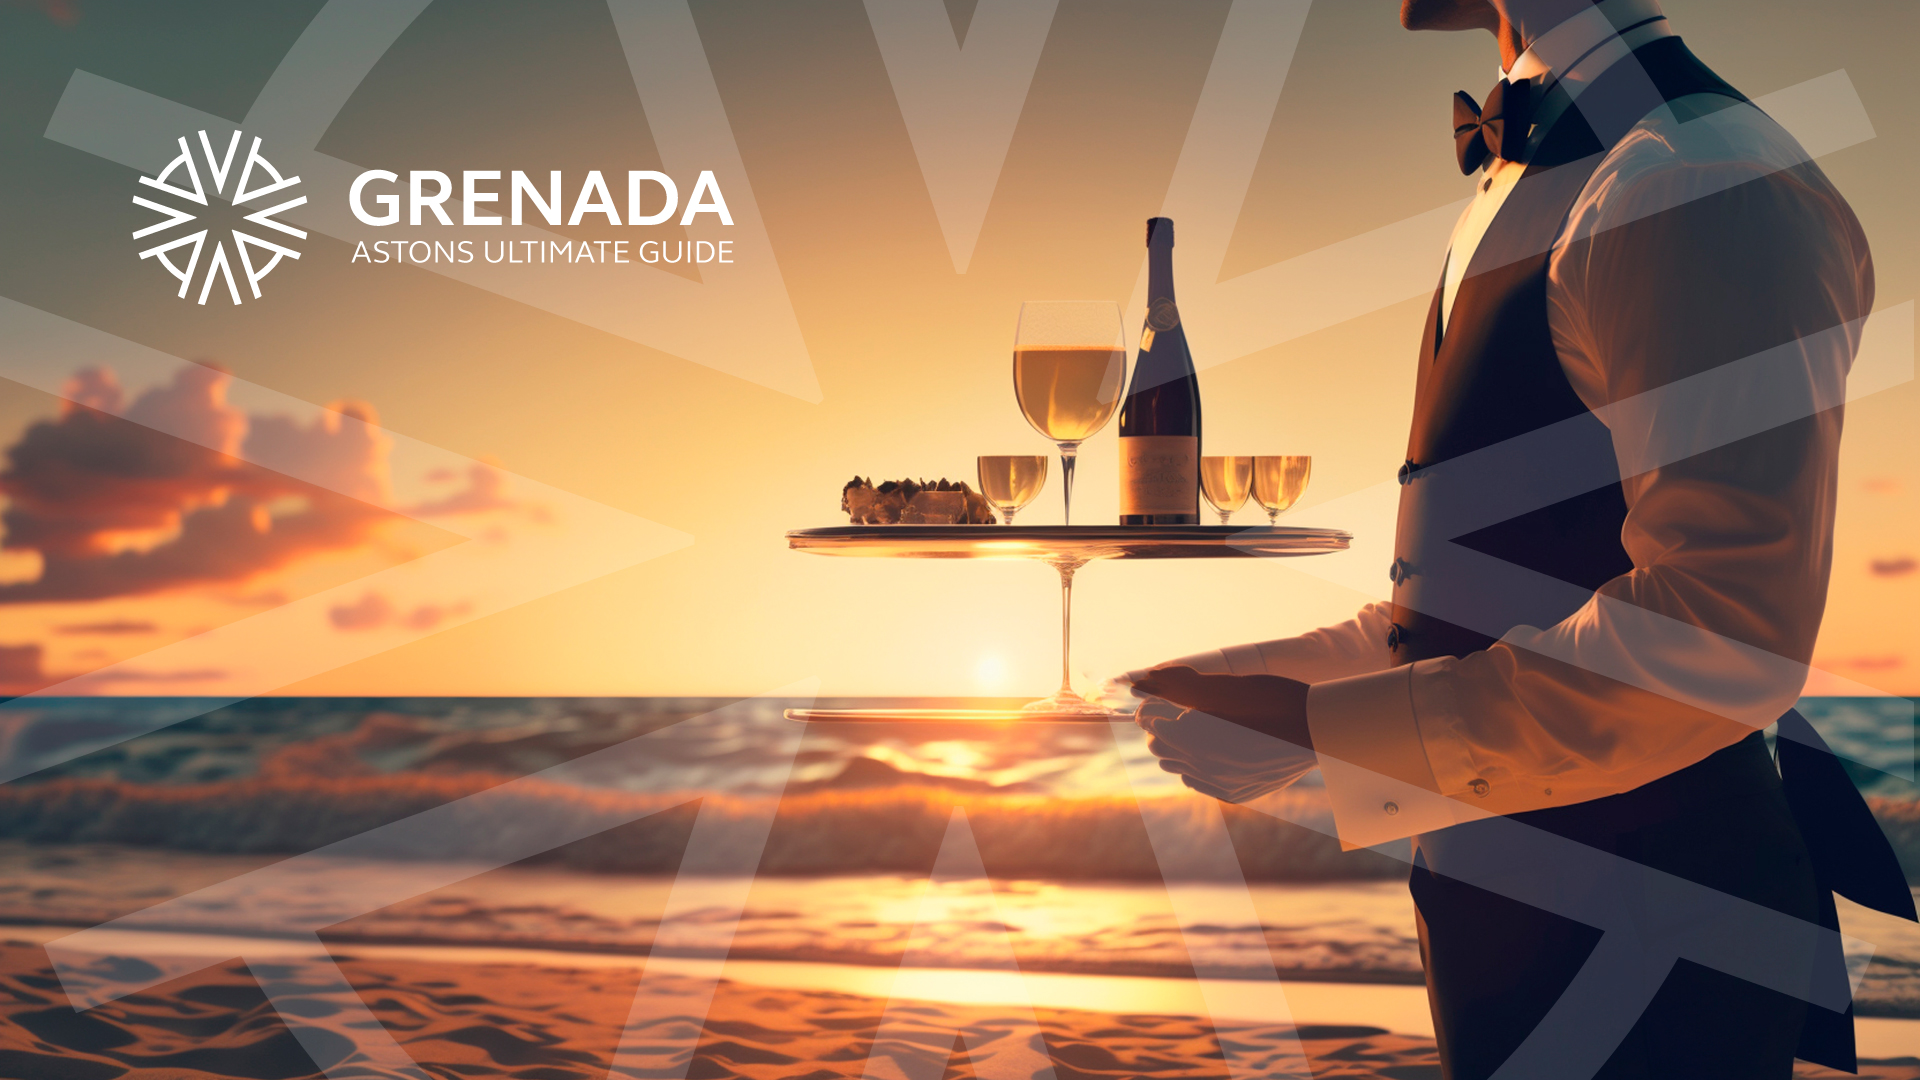 A luxurious image of a waiter with expensive champagne on a beach in Grenada with the setting sun in the background and the Astons logo projected as the rays of the sun